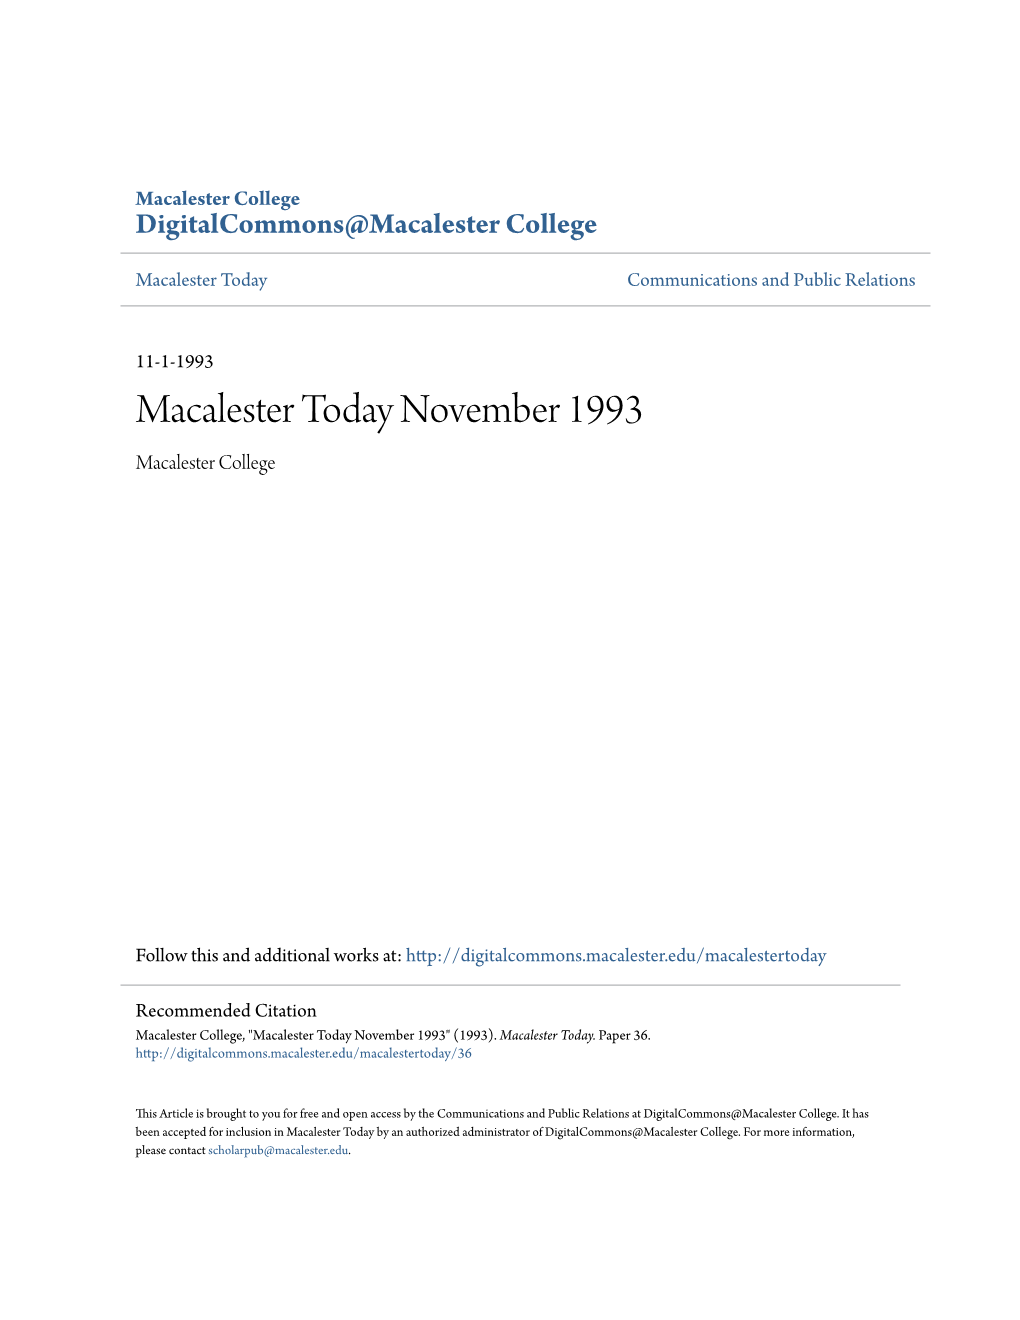 Macalester Today November 1993 Macalester College